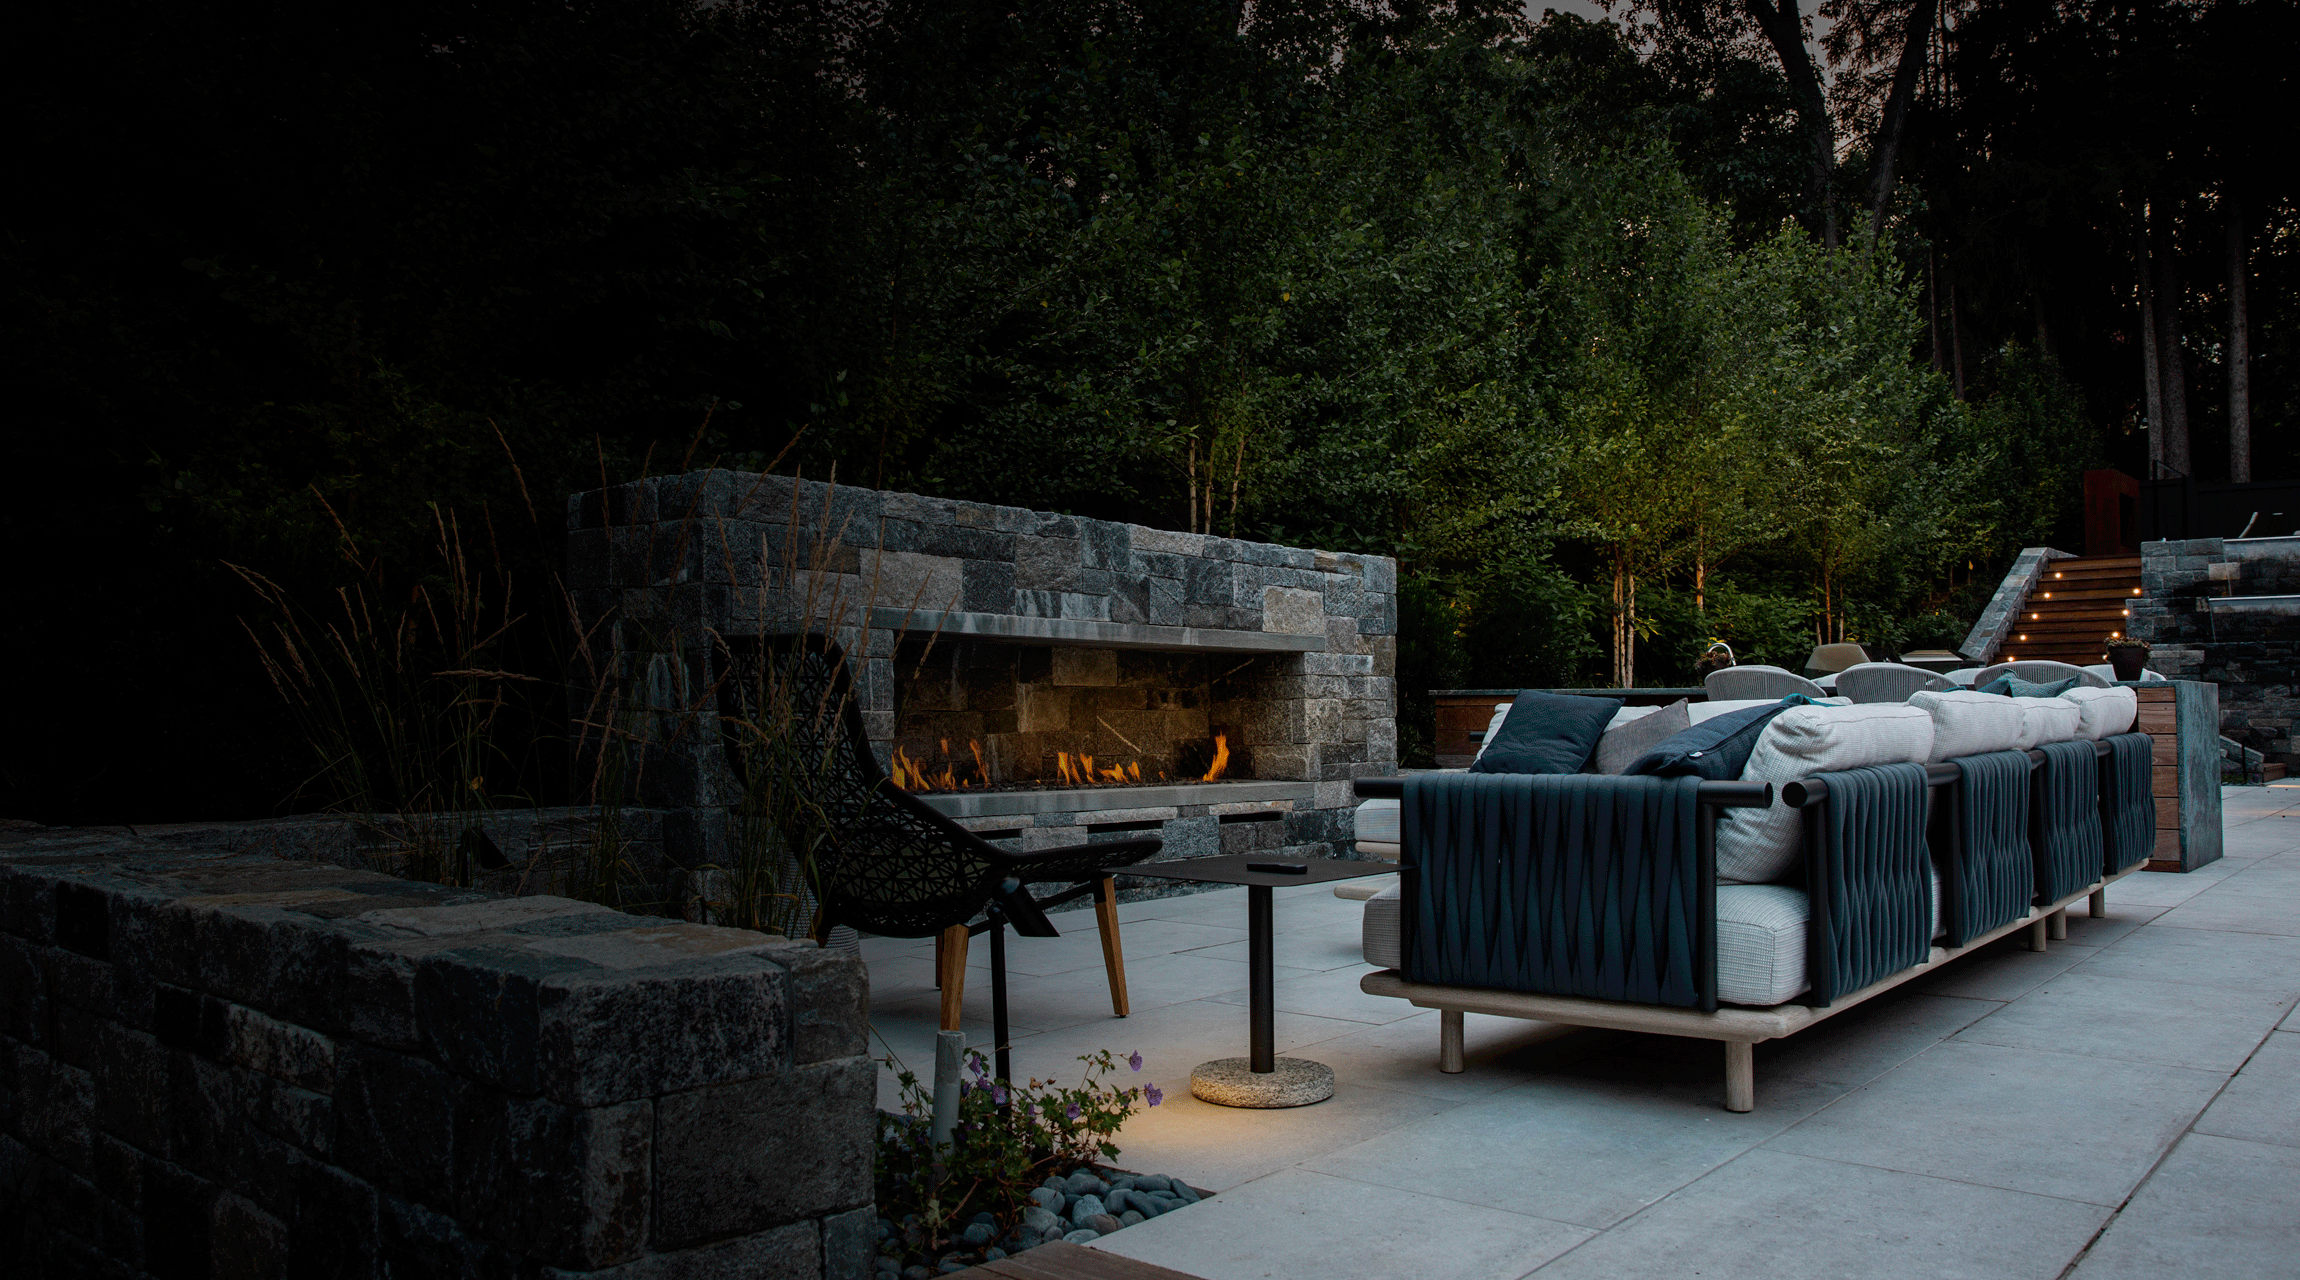 An outdoor patio area at dusk with a lit stone fireplace, comfortable seating, decorative pillows, and surrounding greenery giving a cozy ambiance.